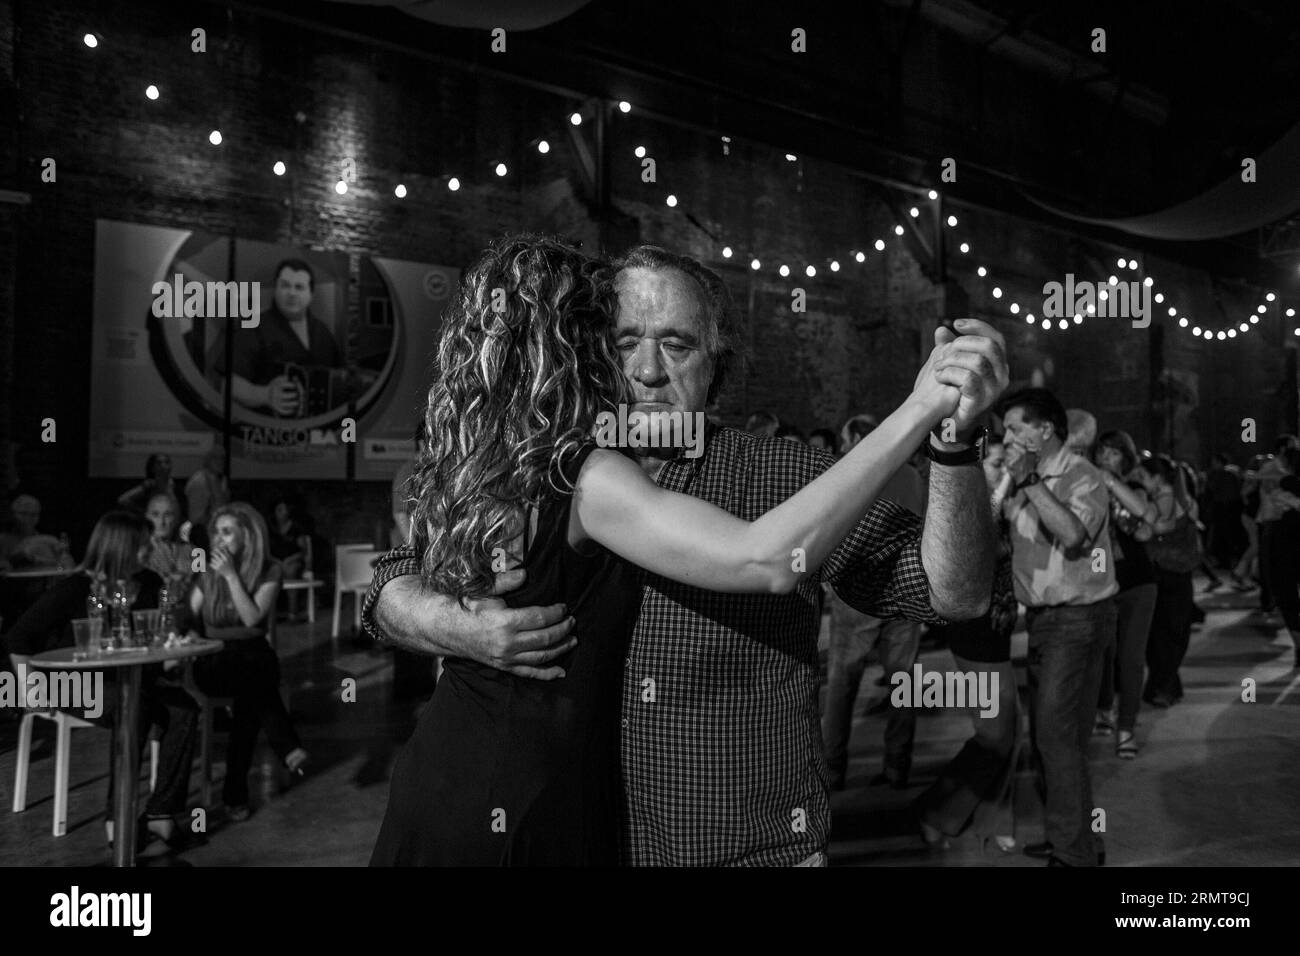 People dance tango during a Milonga event under the circumstance of the Tango World Cup, in Buenos Aires City, Argentina, Aug. 23, 2014. The festival and the world cup is held from Aug. 13 to 26, offering Milongas or dance events with live music, conferences, theme exhibitions, performances, dance seminars, etc., in addition to the official competences with 574 participants from 37 countries around the world. Martin Zabala) (zjy) ARGENTINA-BUENOS AIRES-TANGO e MARTINxZABALA PUBLICATIONxNOTxINxCHN   Celebrities Dance Tango during a  Event Under The Circumstance of The Tango World Cup in Buenos Stock Photo